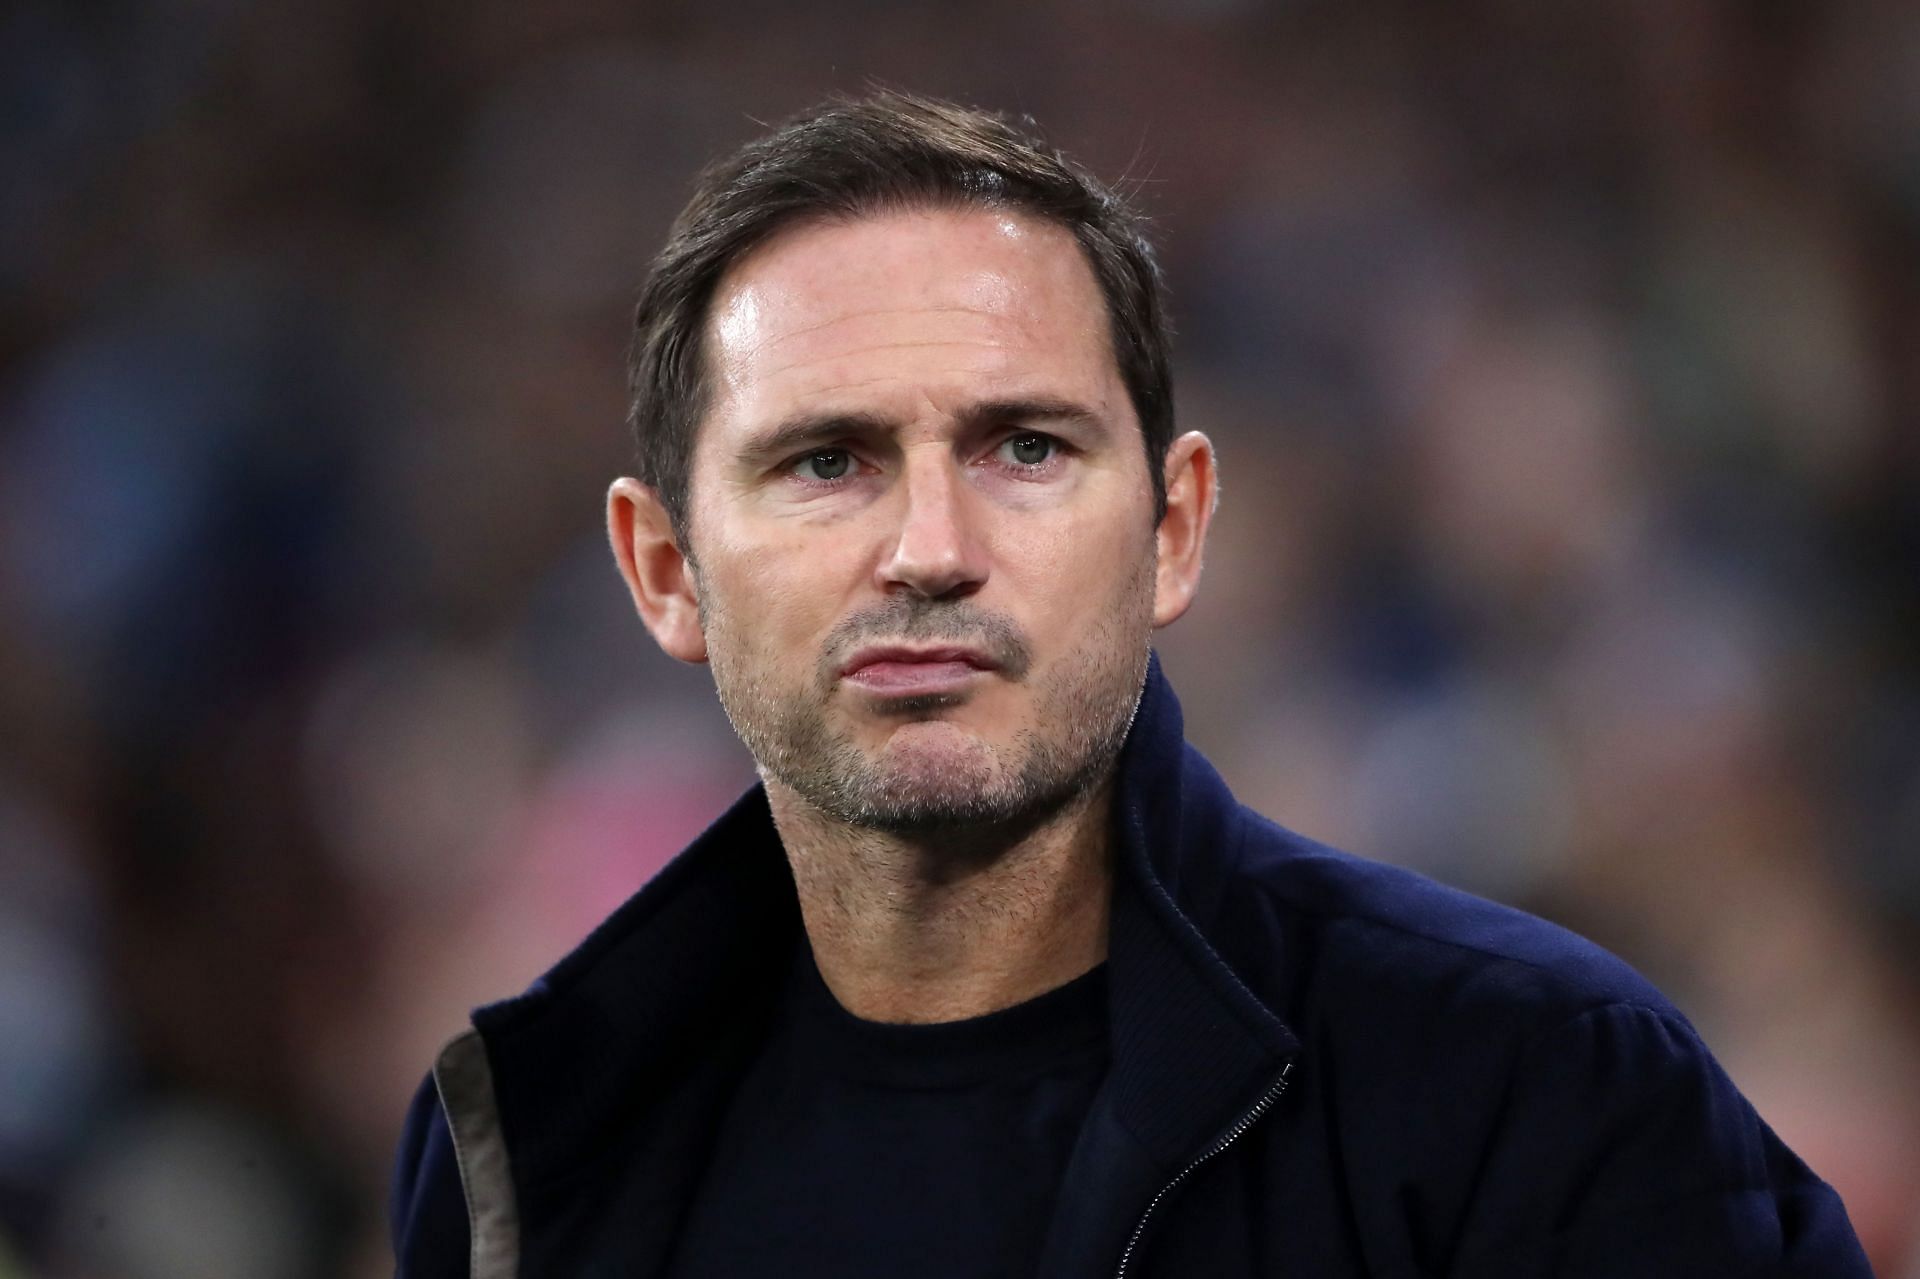 Chelsea legend Frank Lampard breaks silence and speaks out on Everton sacking for the first time 